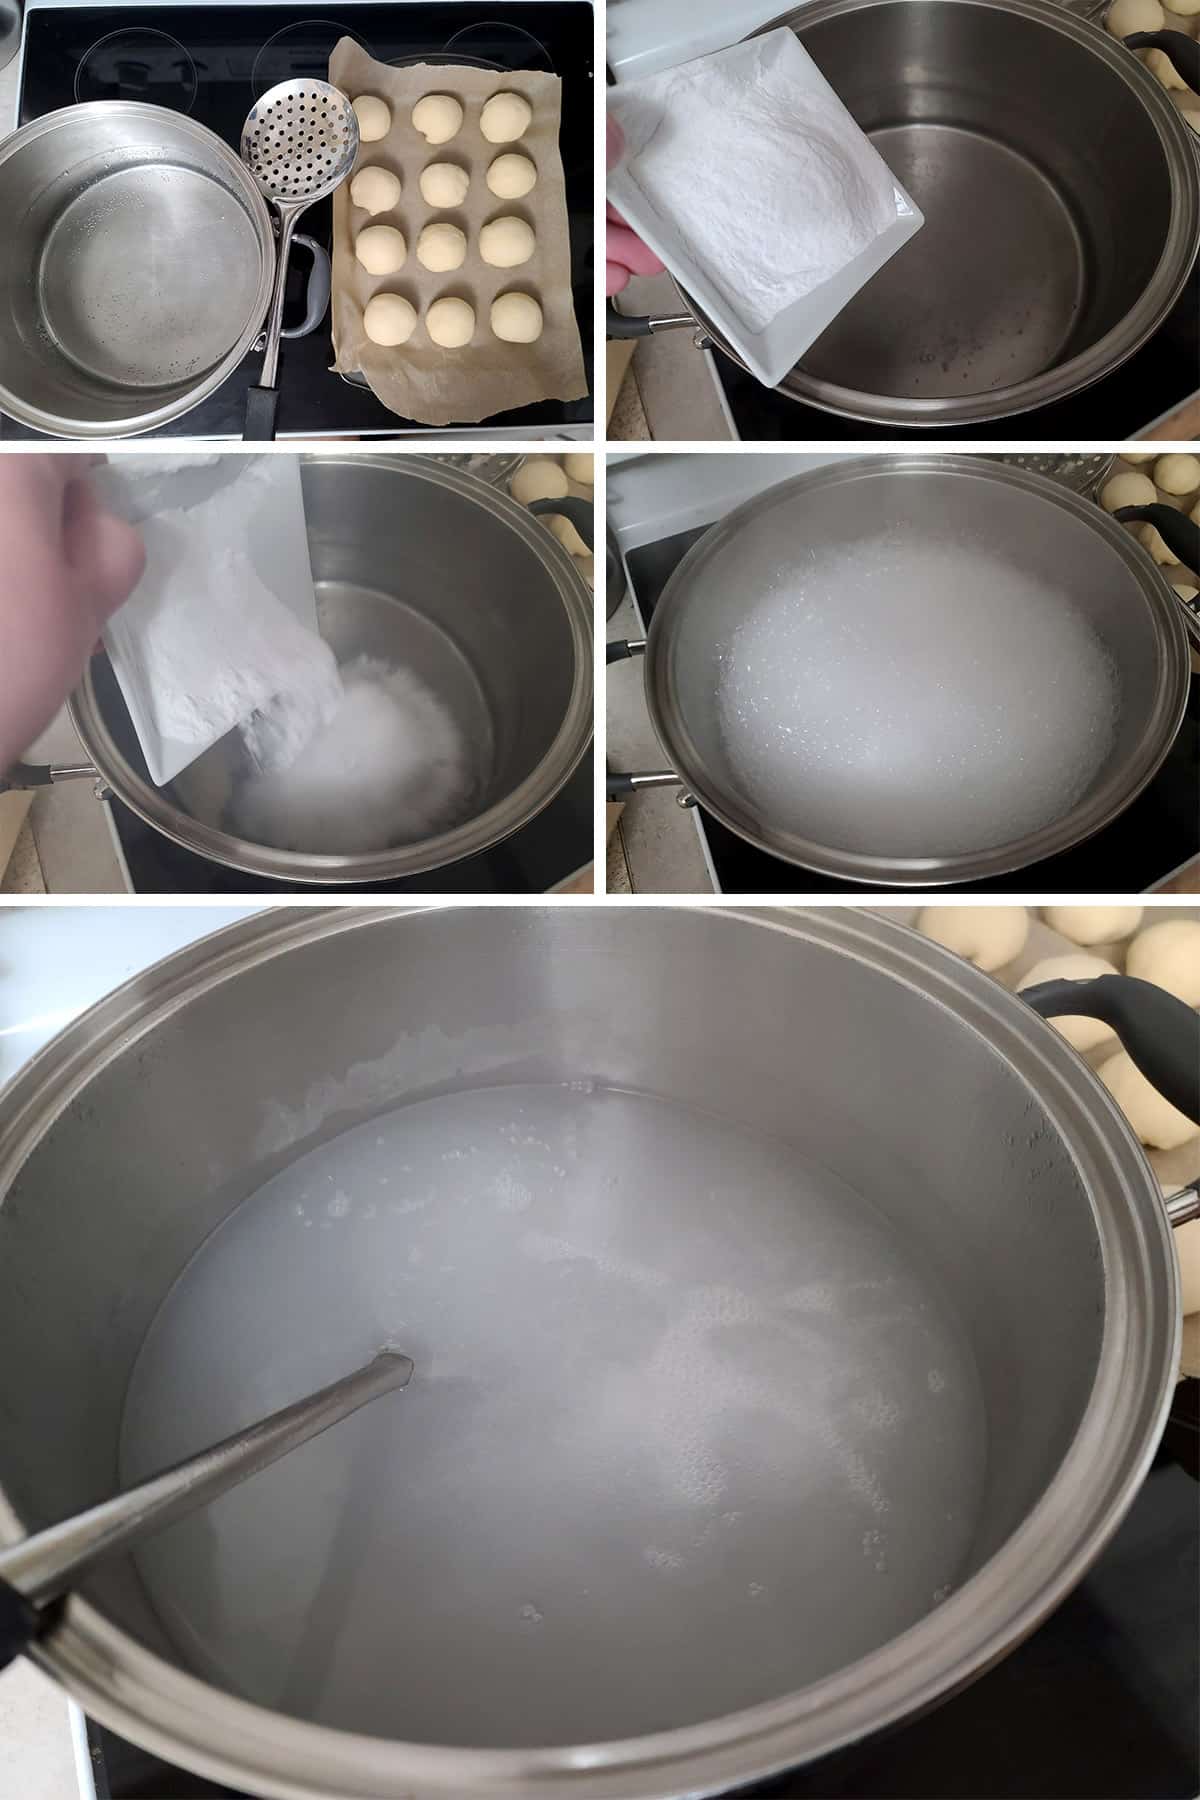 A 5 part image showing the baking soda bath being mixed in a large pot.